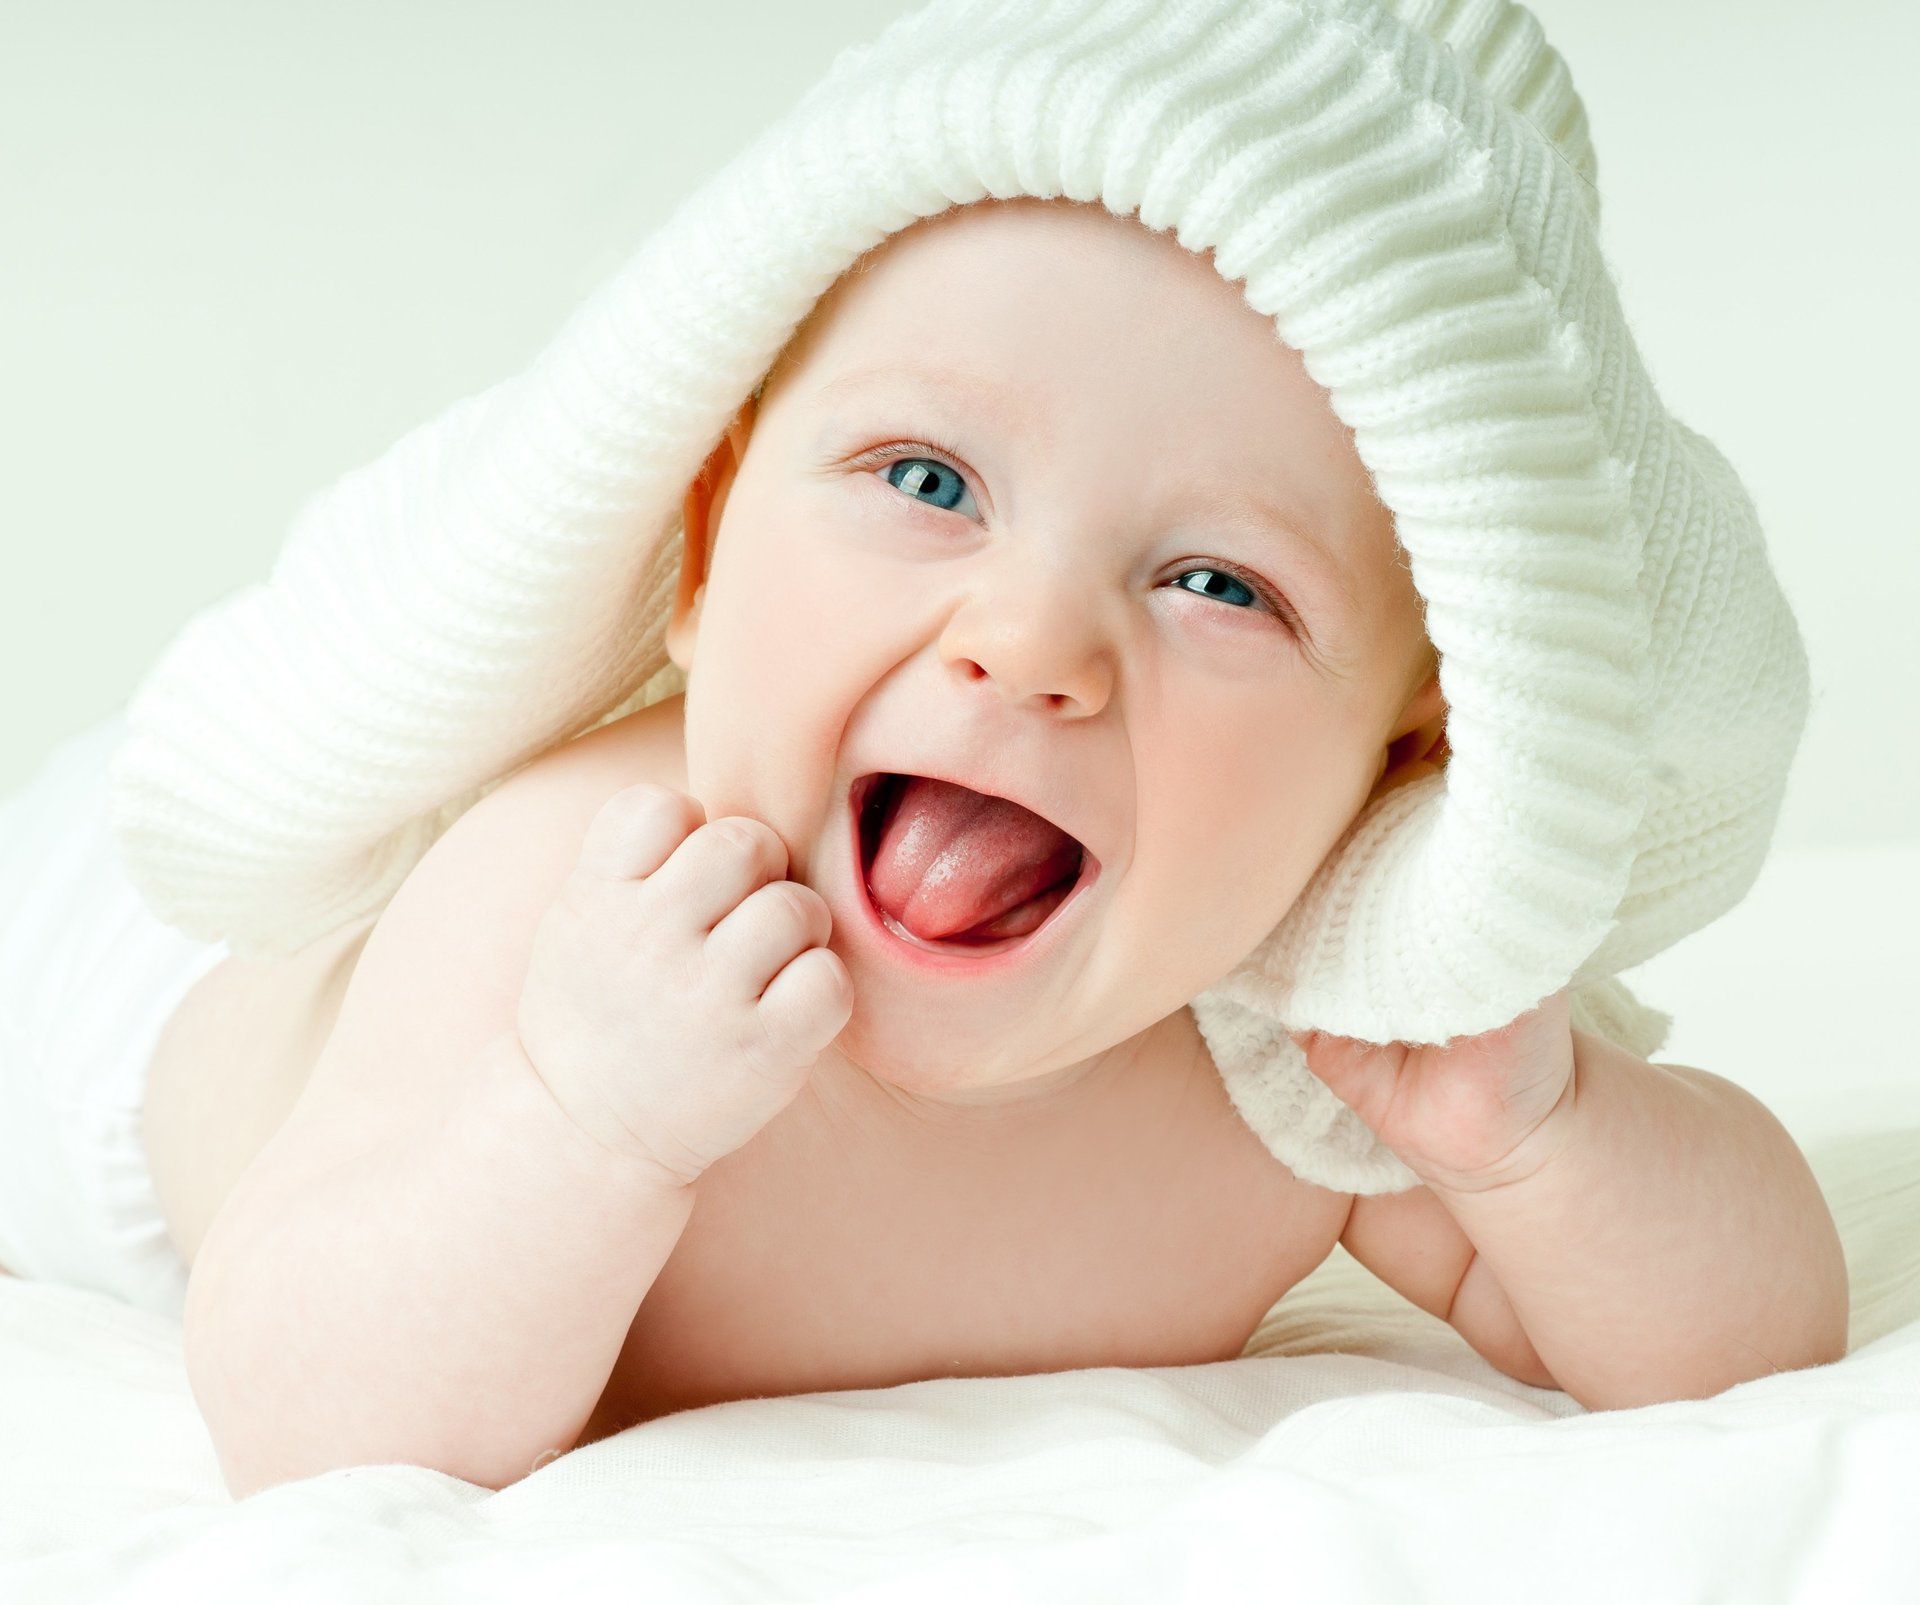 Image of a white baby, laying on its stomach with head up, smiling, with tongue out.